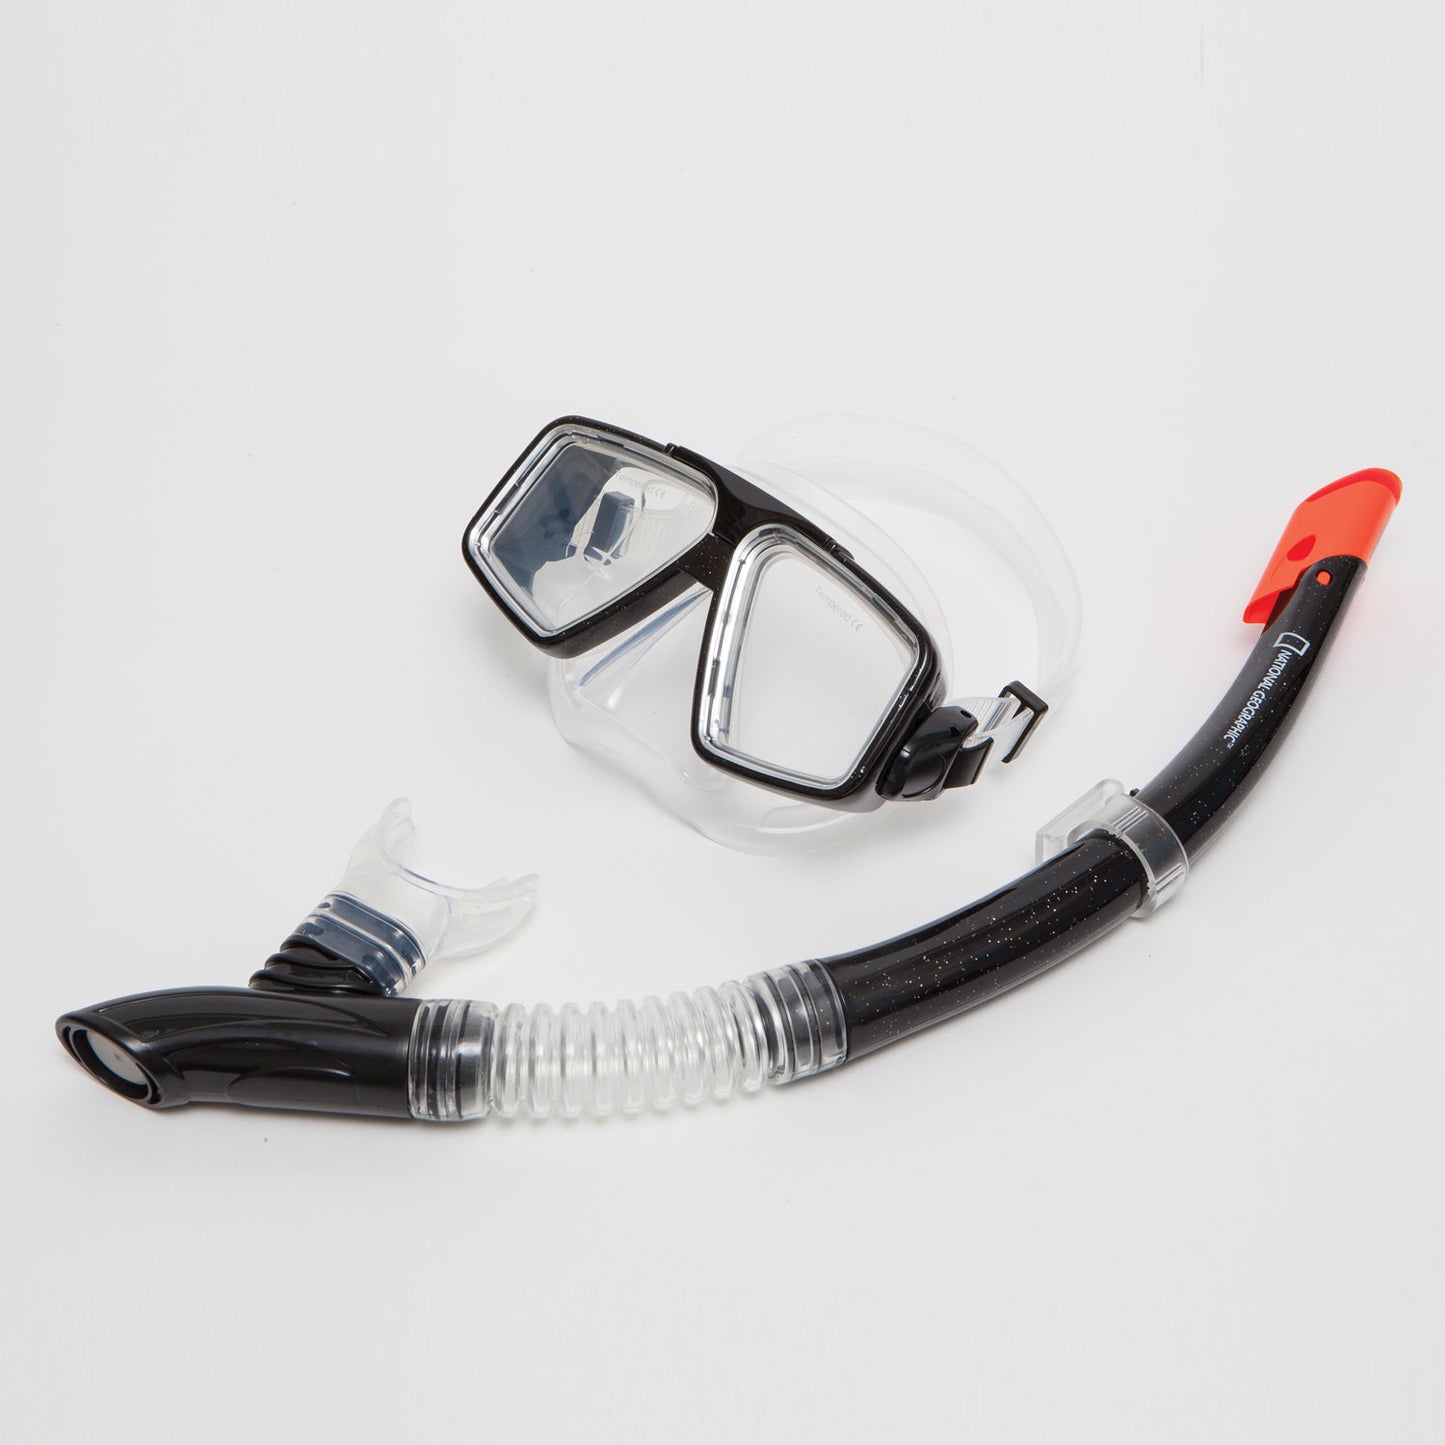 National Geographic Tunny 4 Snorkeling Mask and Snorkel Set snorkel Black